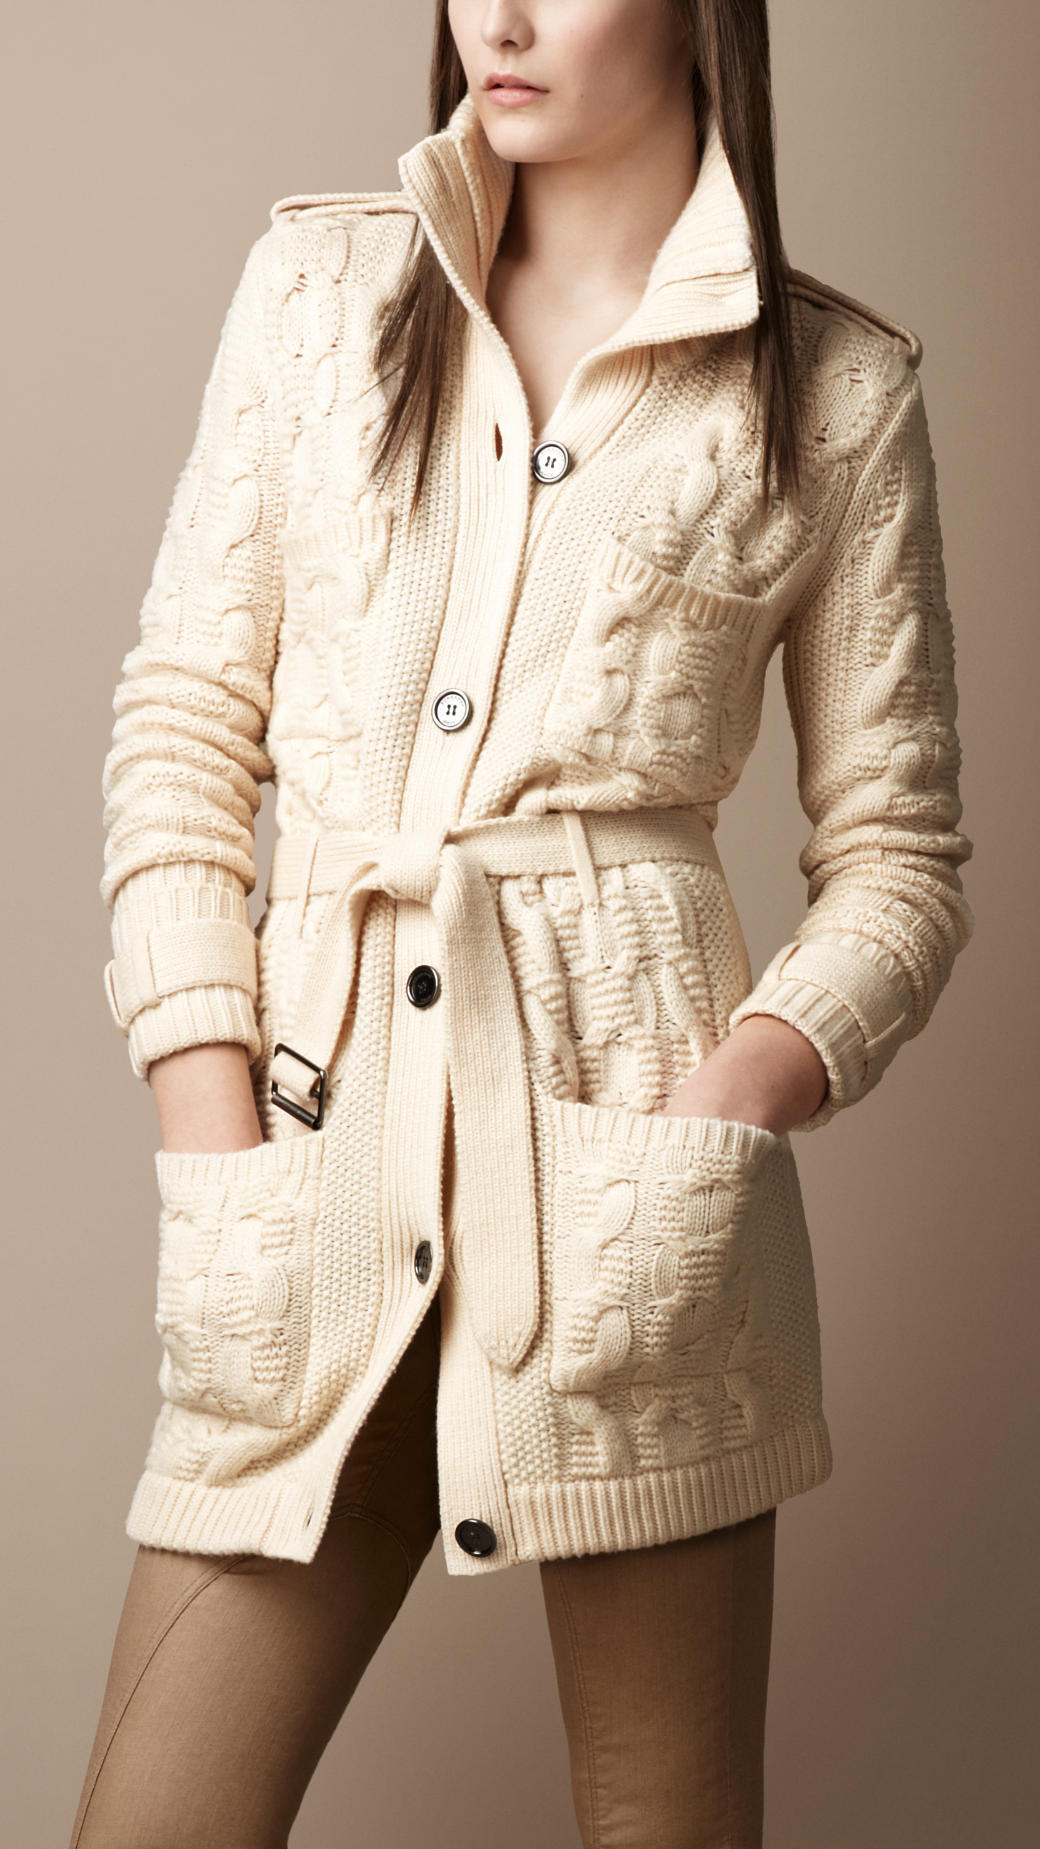 Lyst - Burberry Brit Wool Cashmere Cable Knit Cardigan in Natural